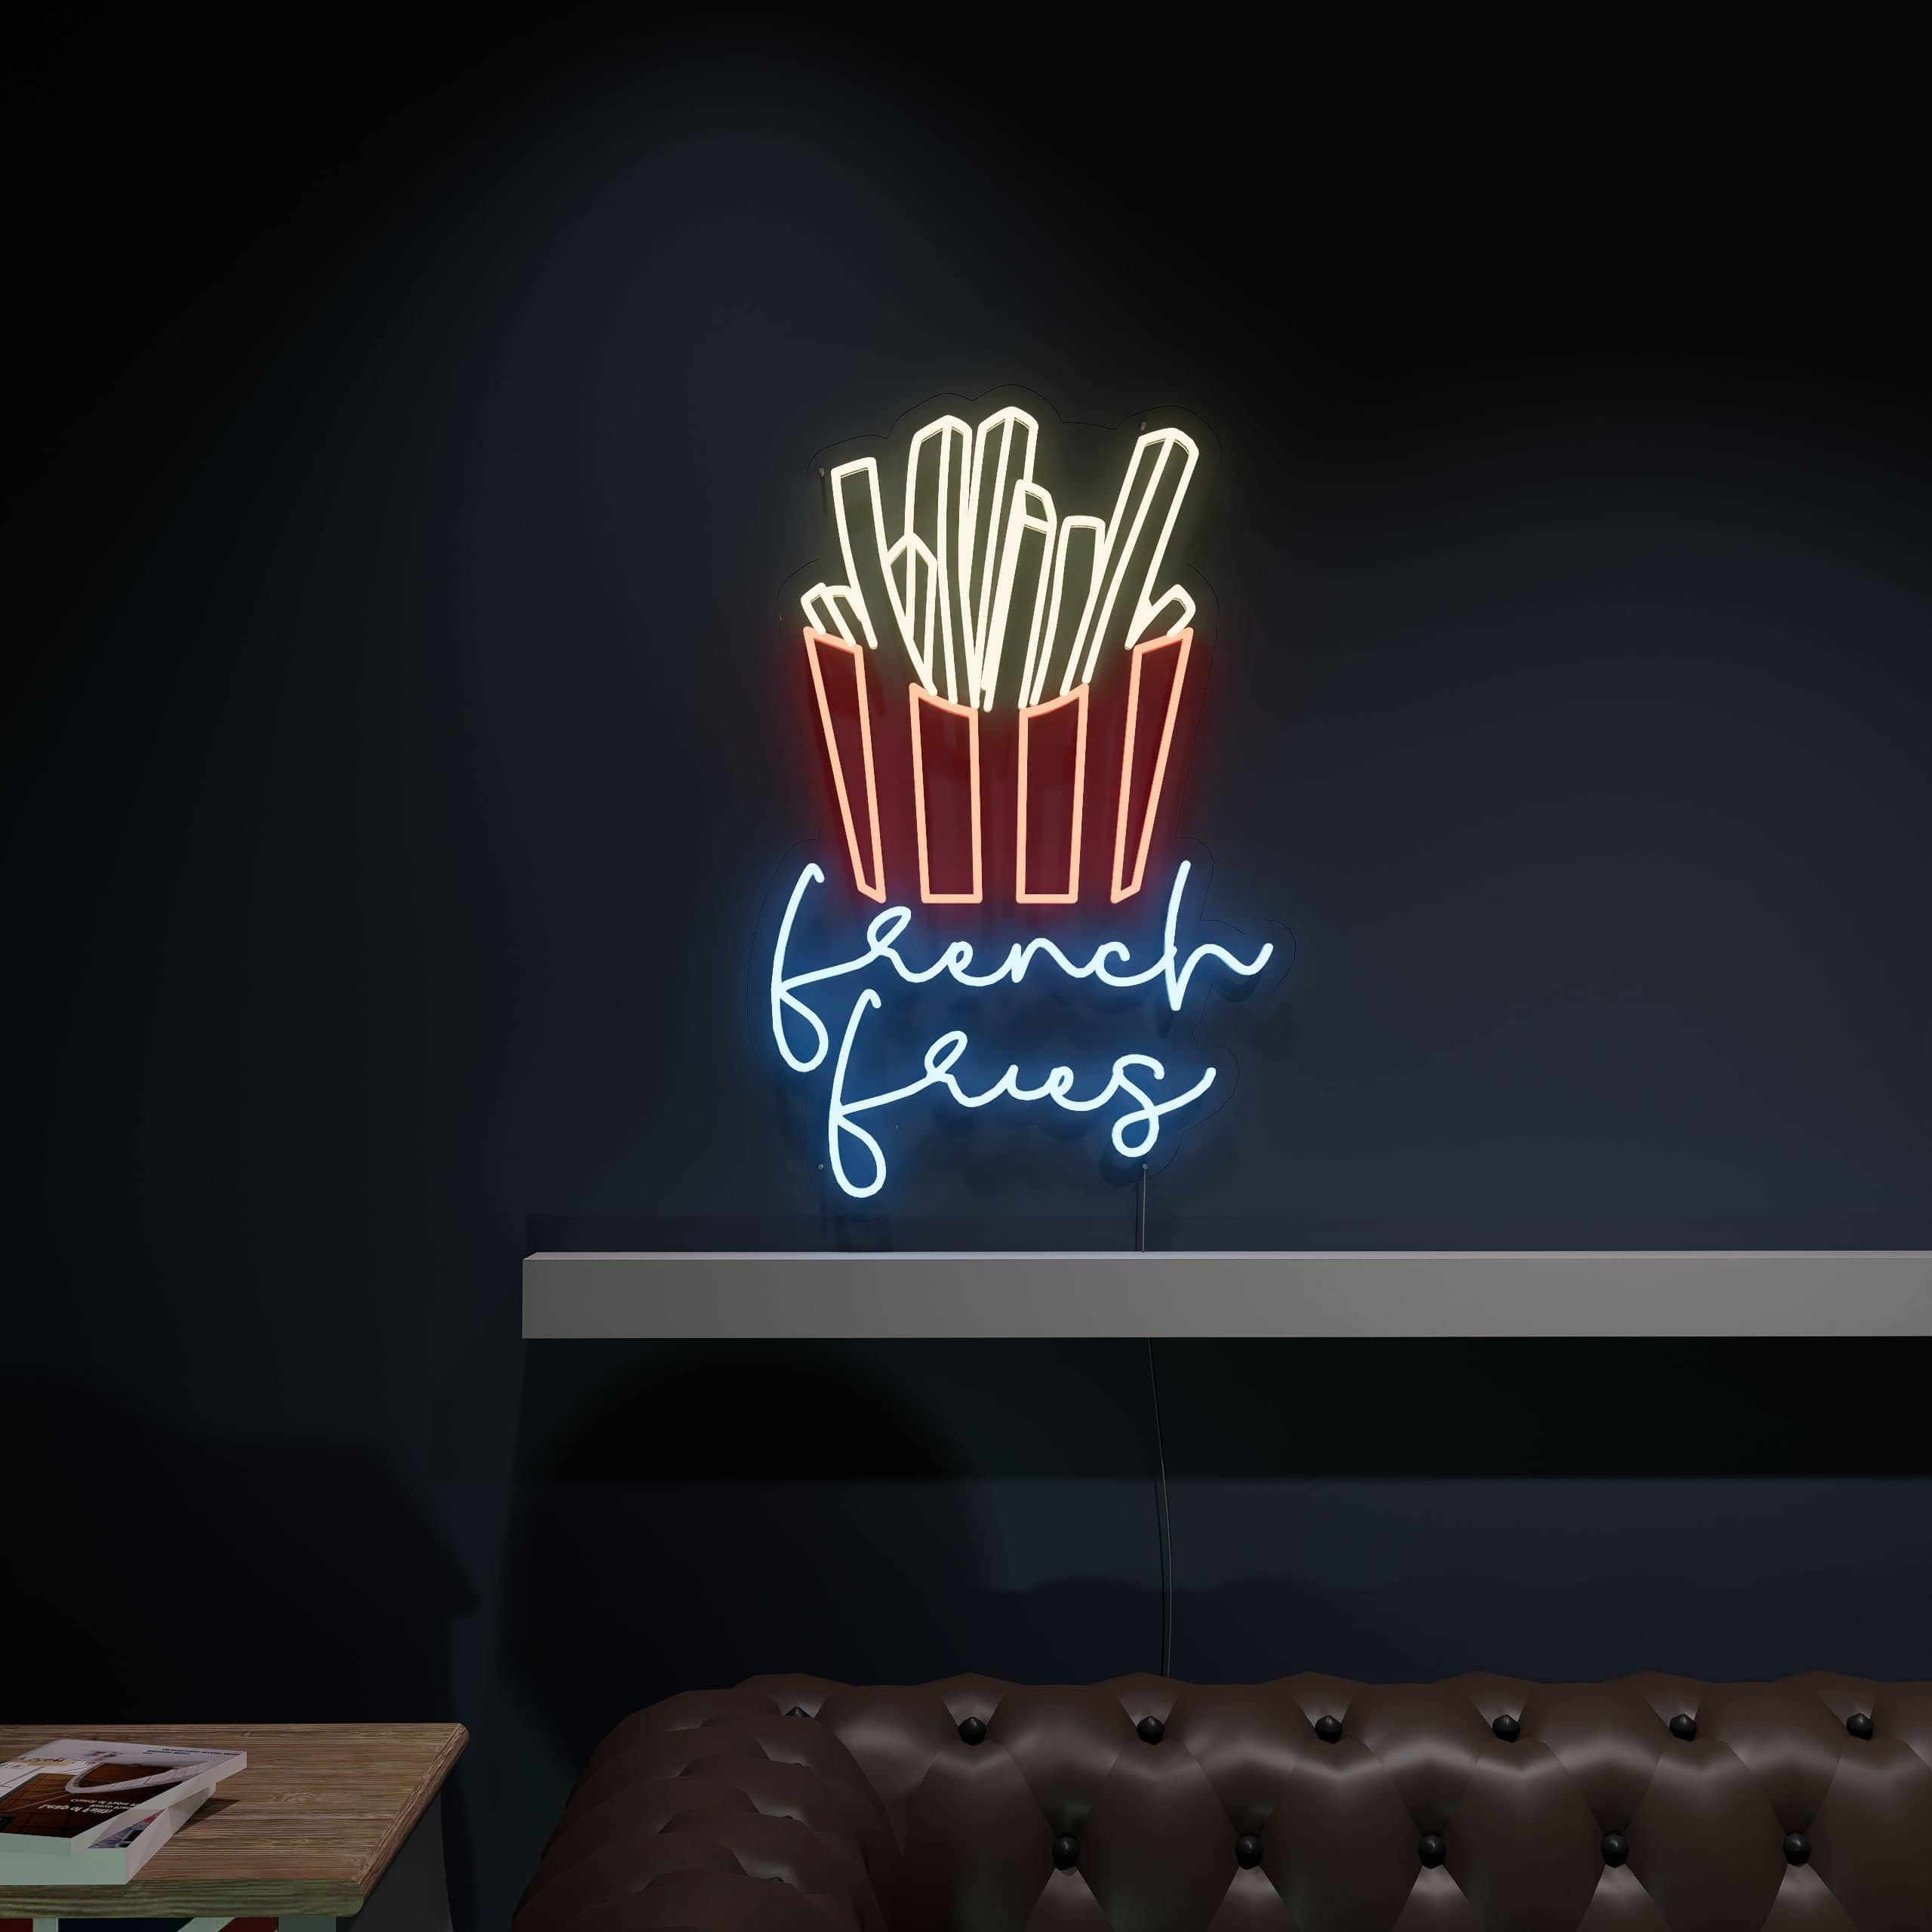 Bright neon sign beckons to delicious fries